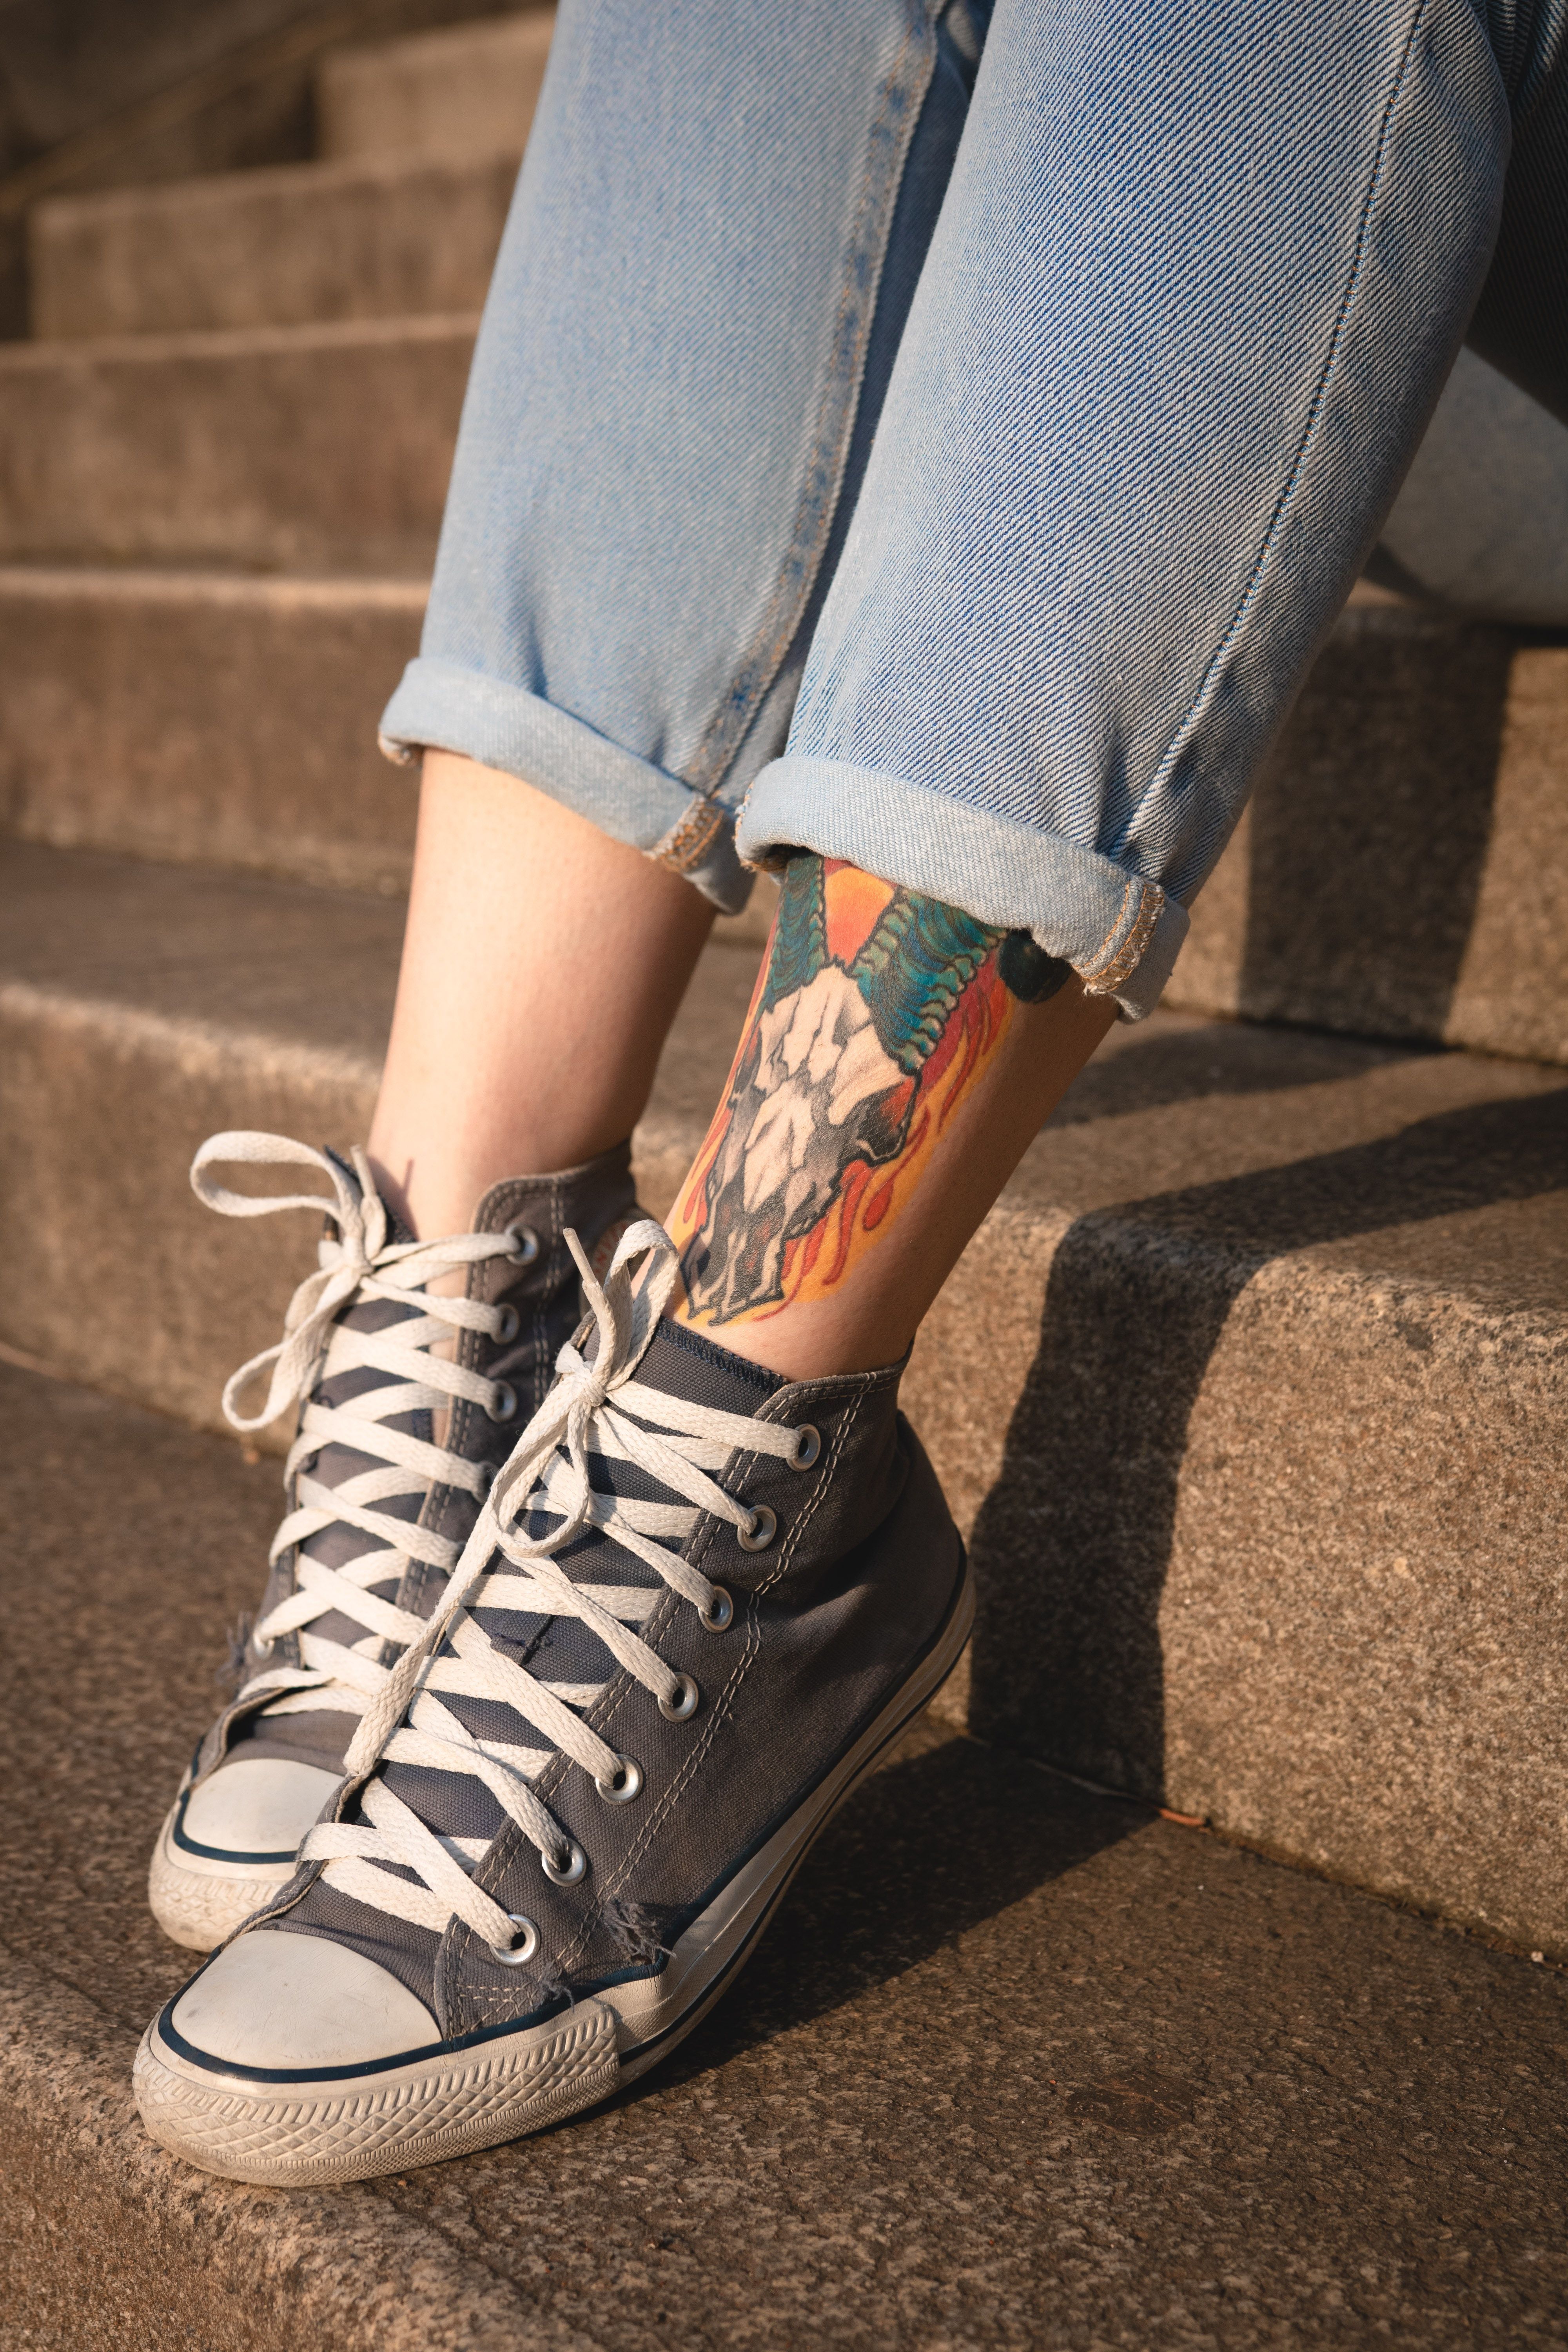 A woman with tattoos on her legs and feet - Converse, shoes